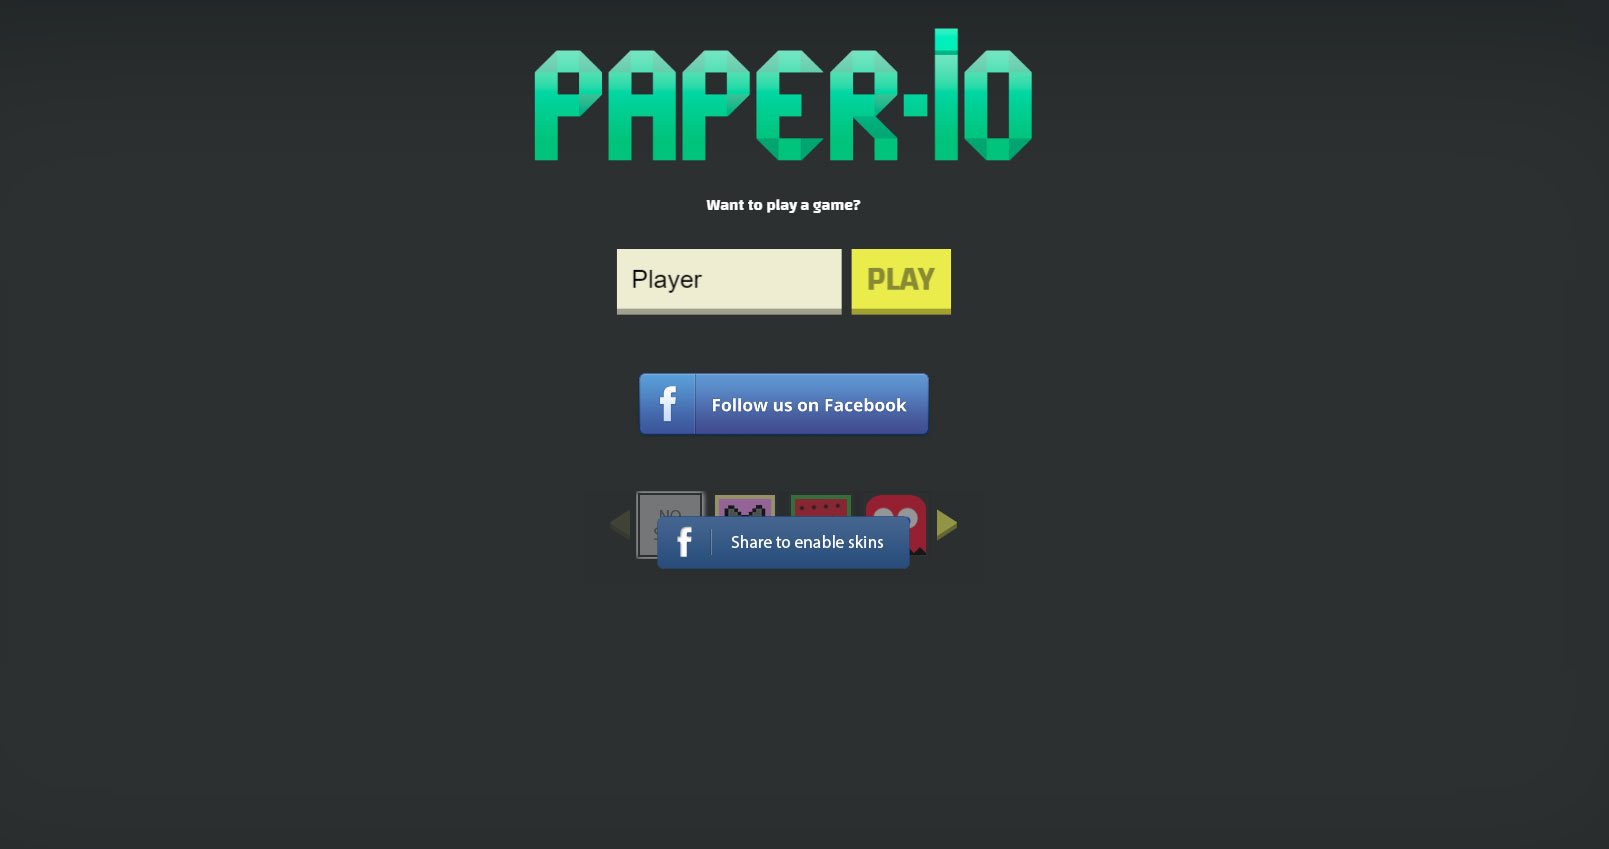 paperio on X: now you can play paper.io 2 online #paperio2 https